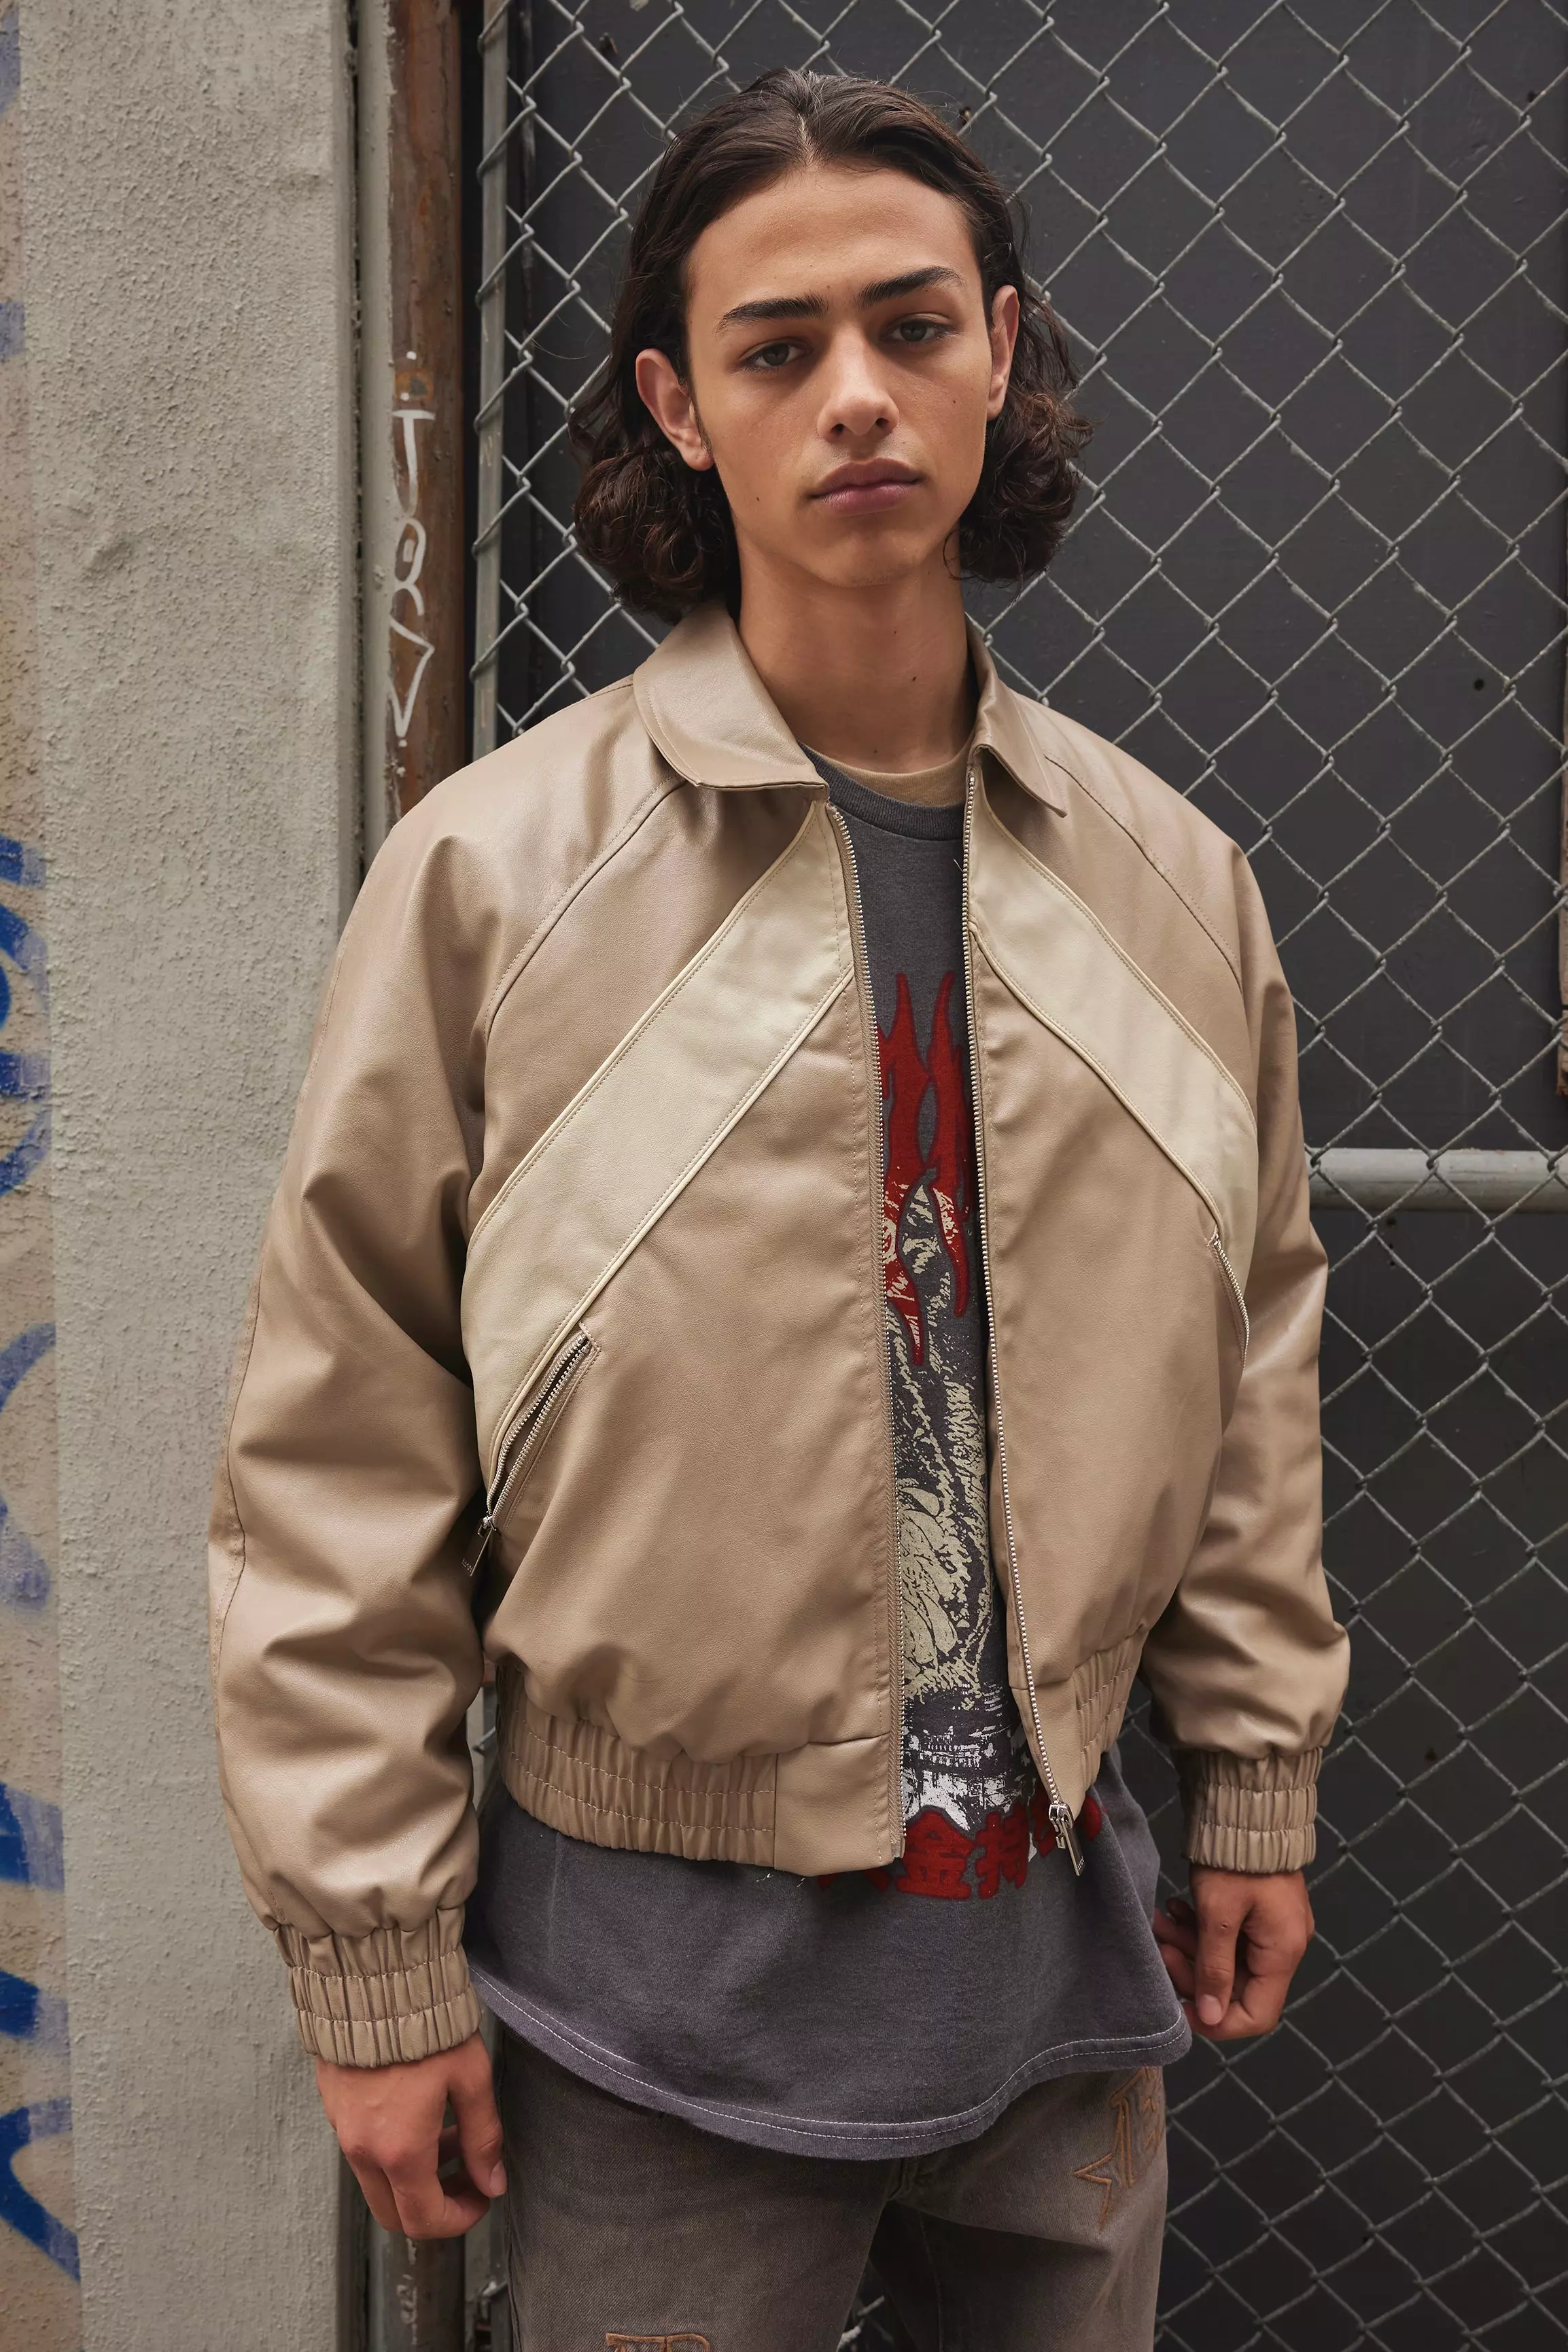 My Personal Style: Belt Bags & Bomber Jackets 24:7 For Every